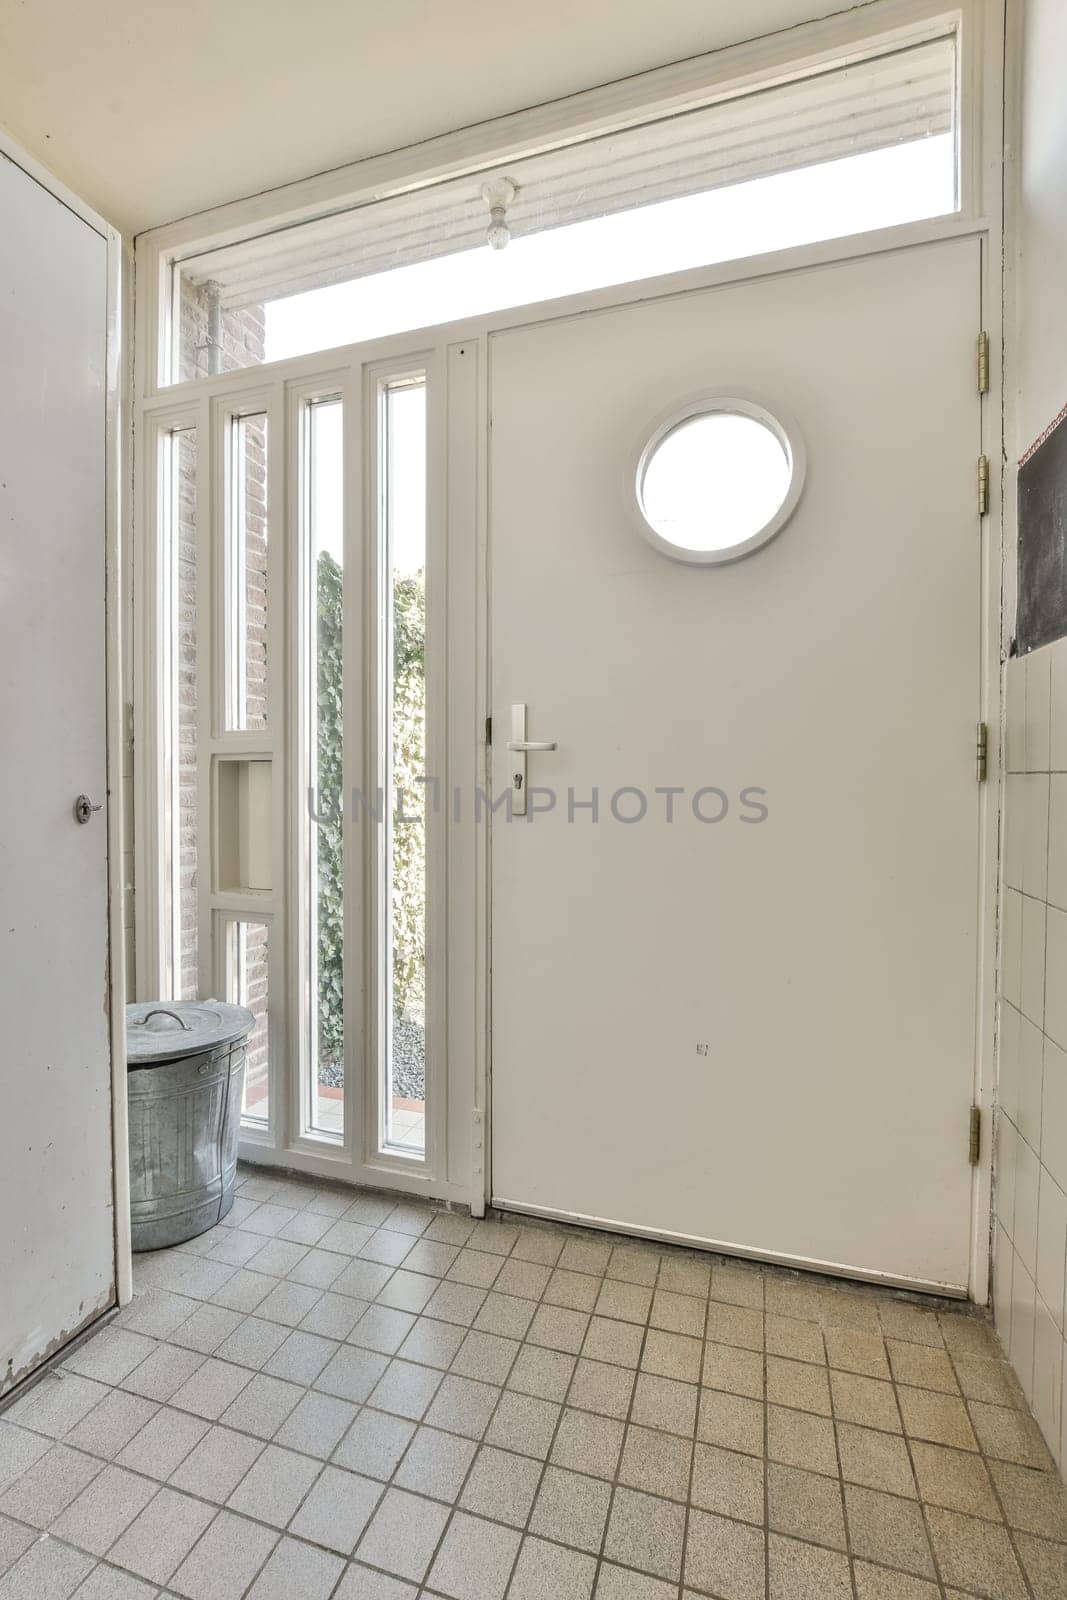 a white door in a room with tile flooring and an open doorway leading to the outside area that leads to a patio